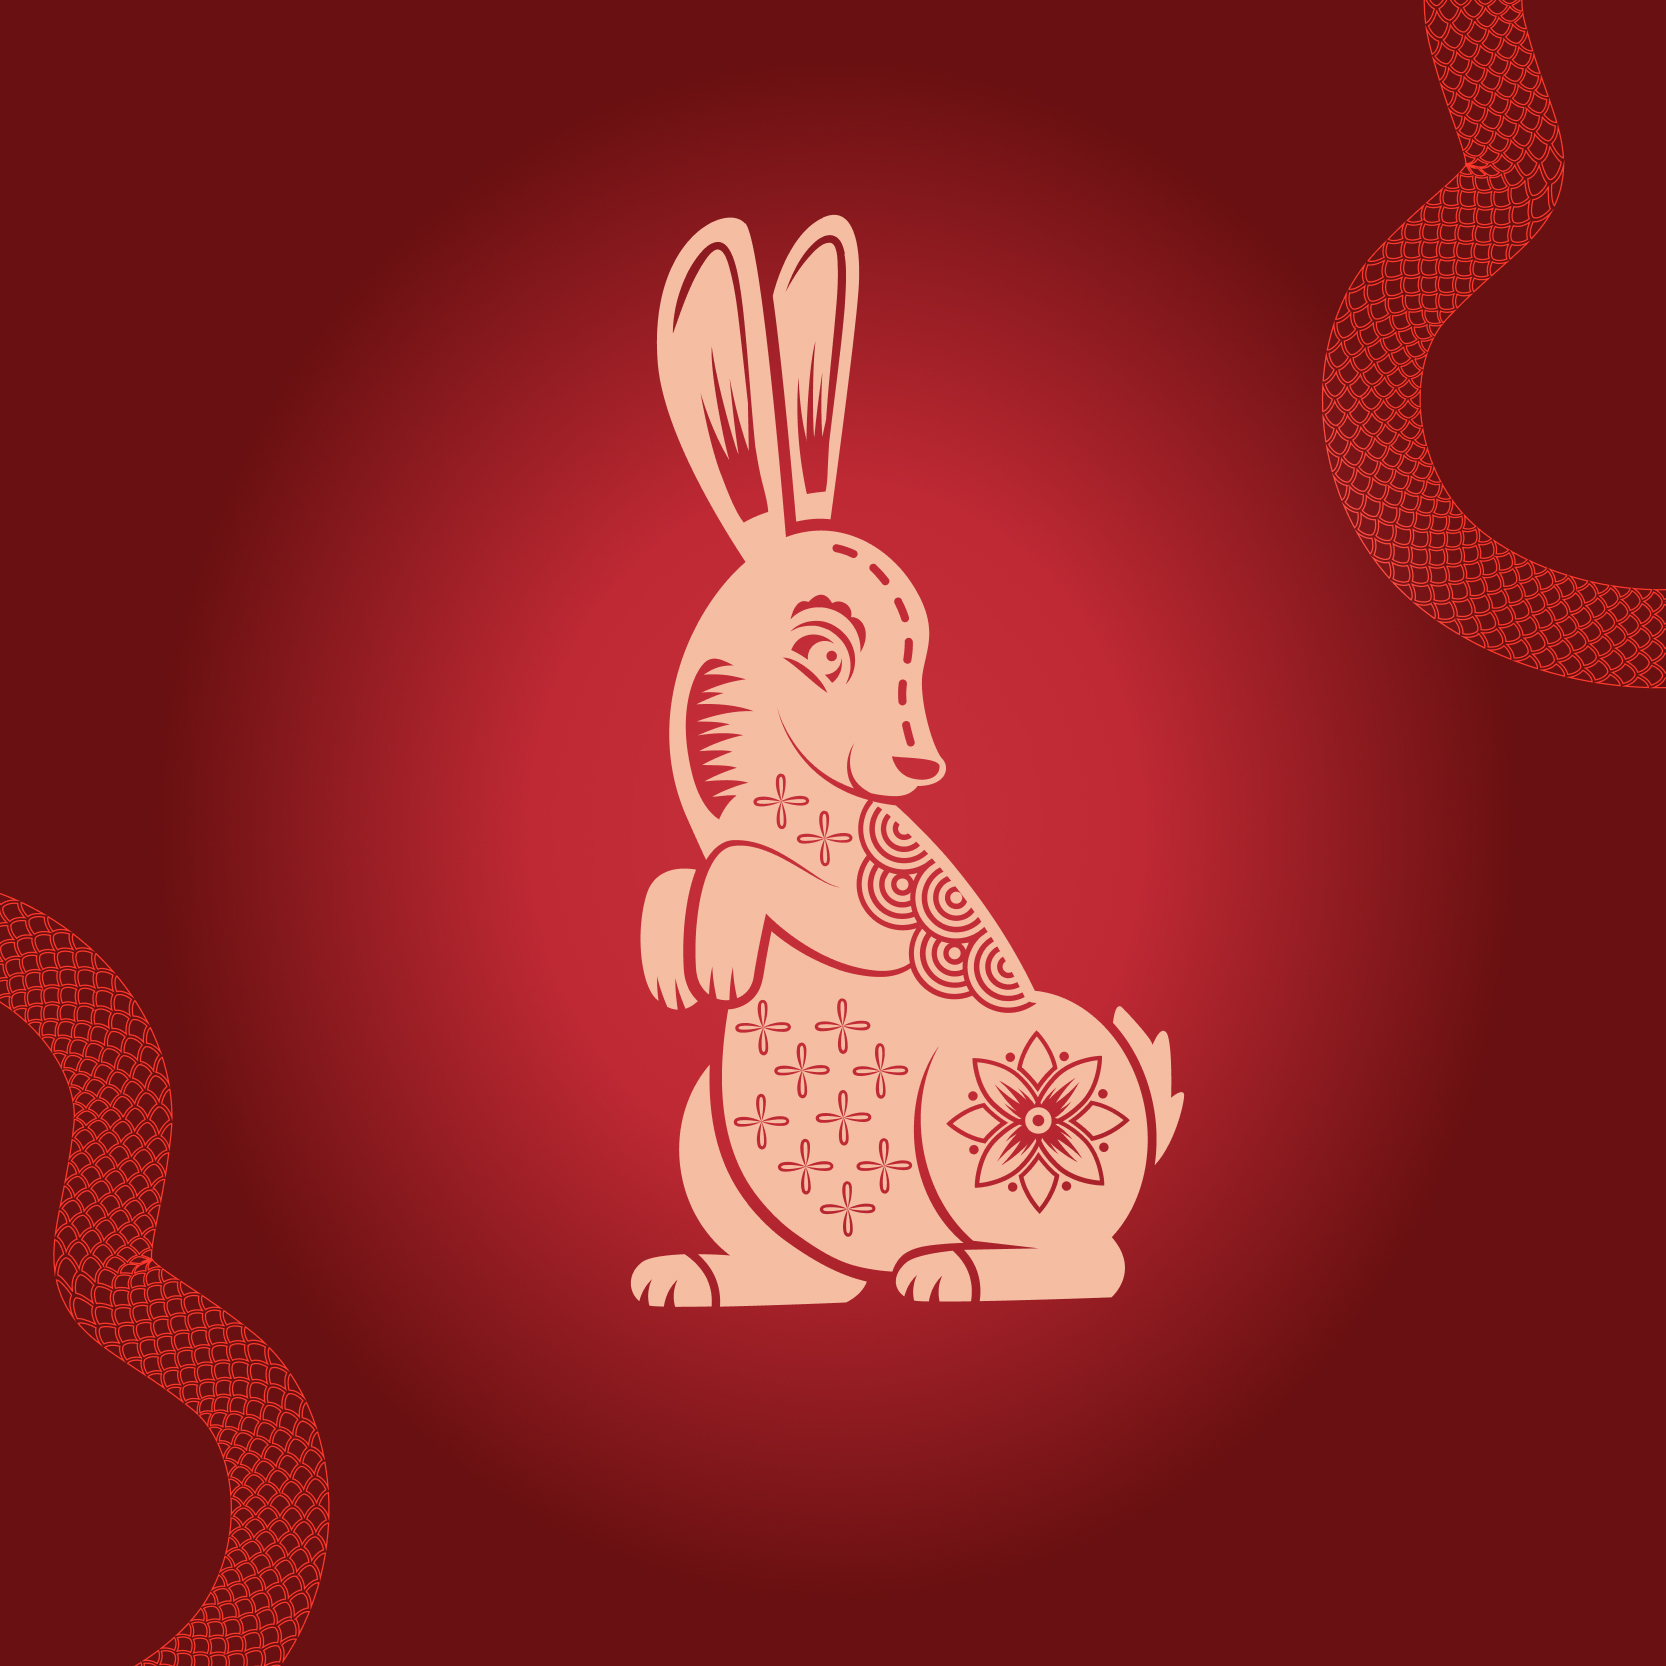 YEAR OF THE RABBIT